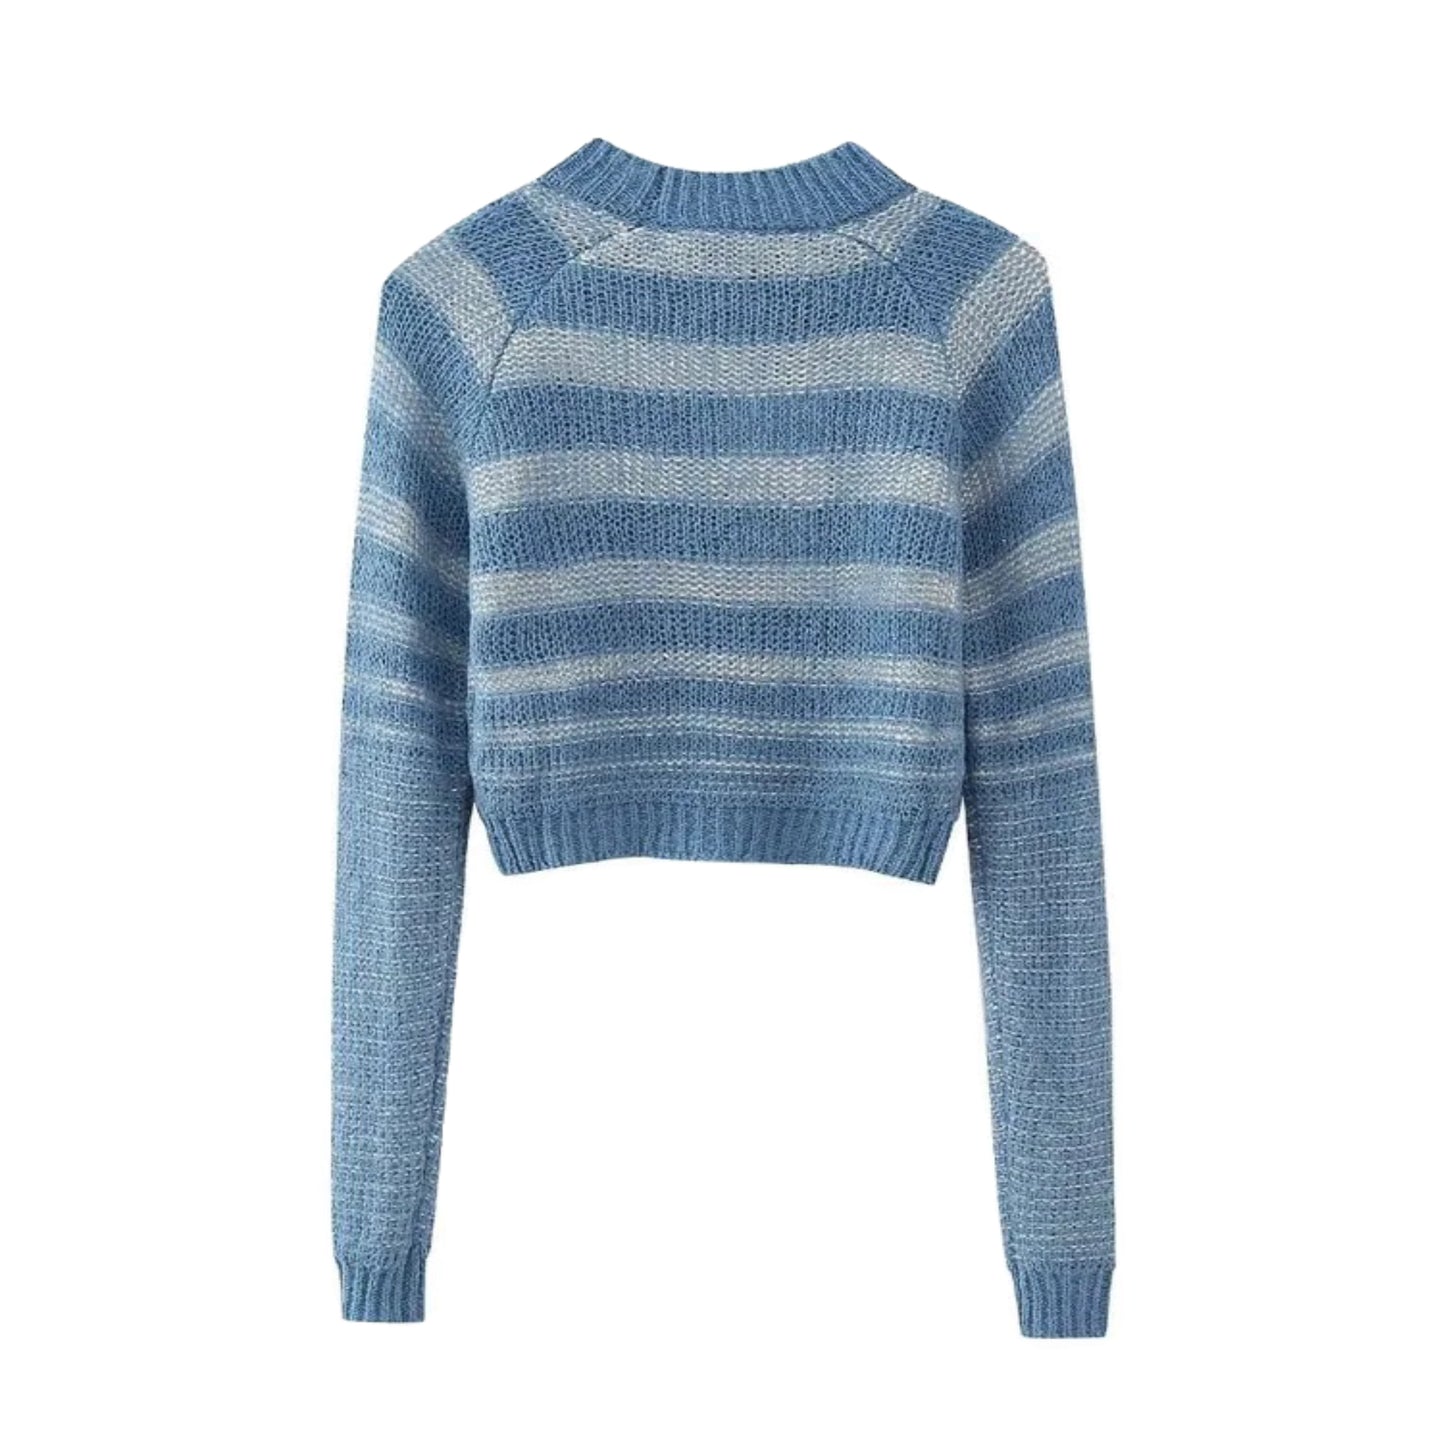 Lake Blue Striped Knit Cropped Pullover Sweater